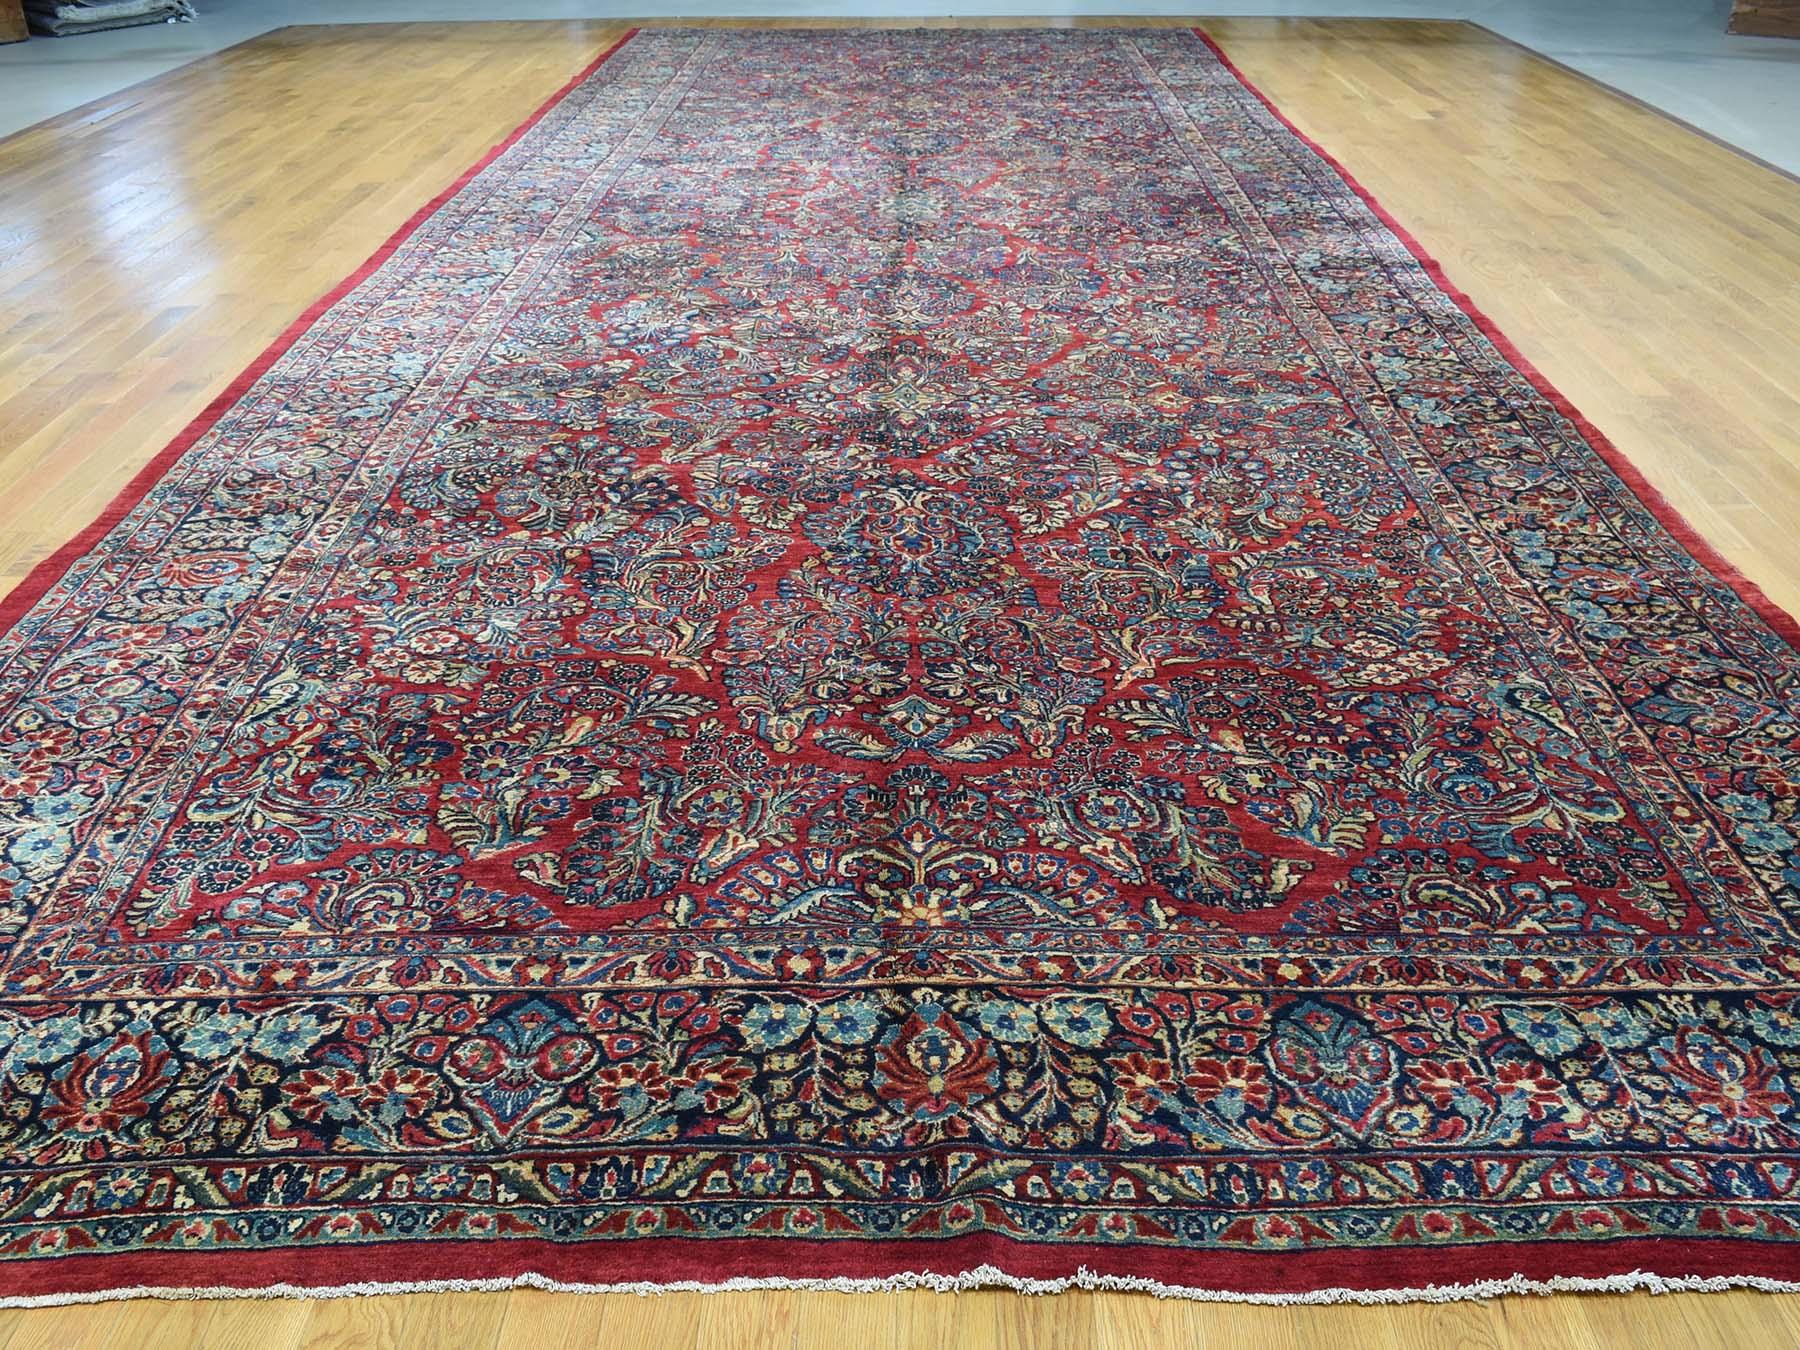 This is a genuine hand knotted Oriental rug. It is not hand tufted or machine made rug. Our entire inventory is made of either hand knotted or handwoven rugs.

Renovate your home style with this charming hand knotted carpet. This handcrafted antique